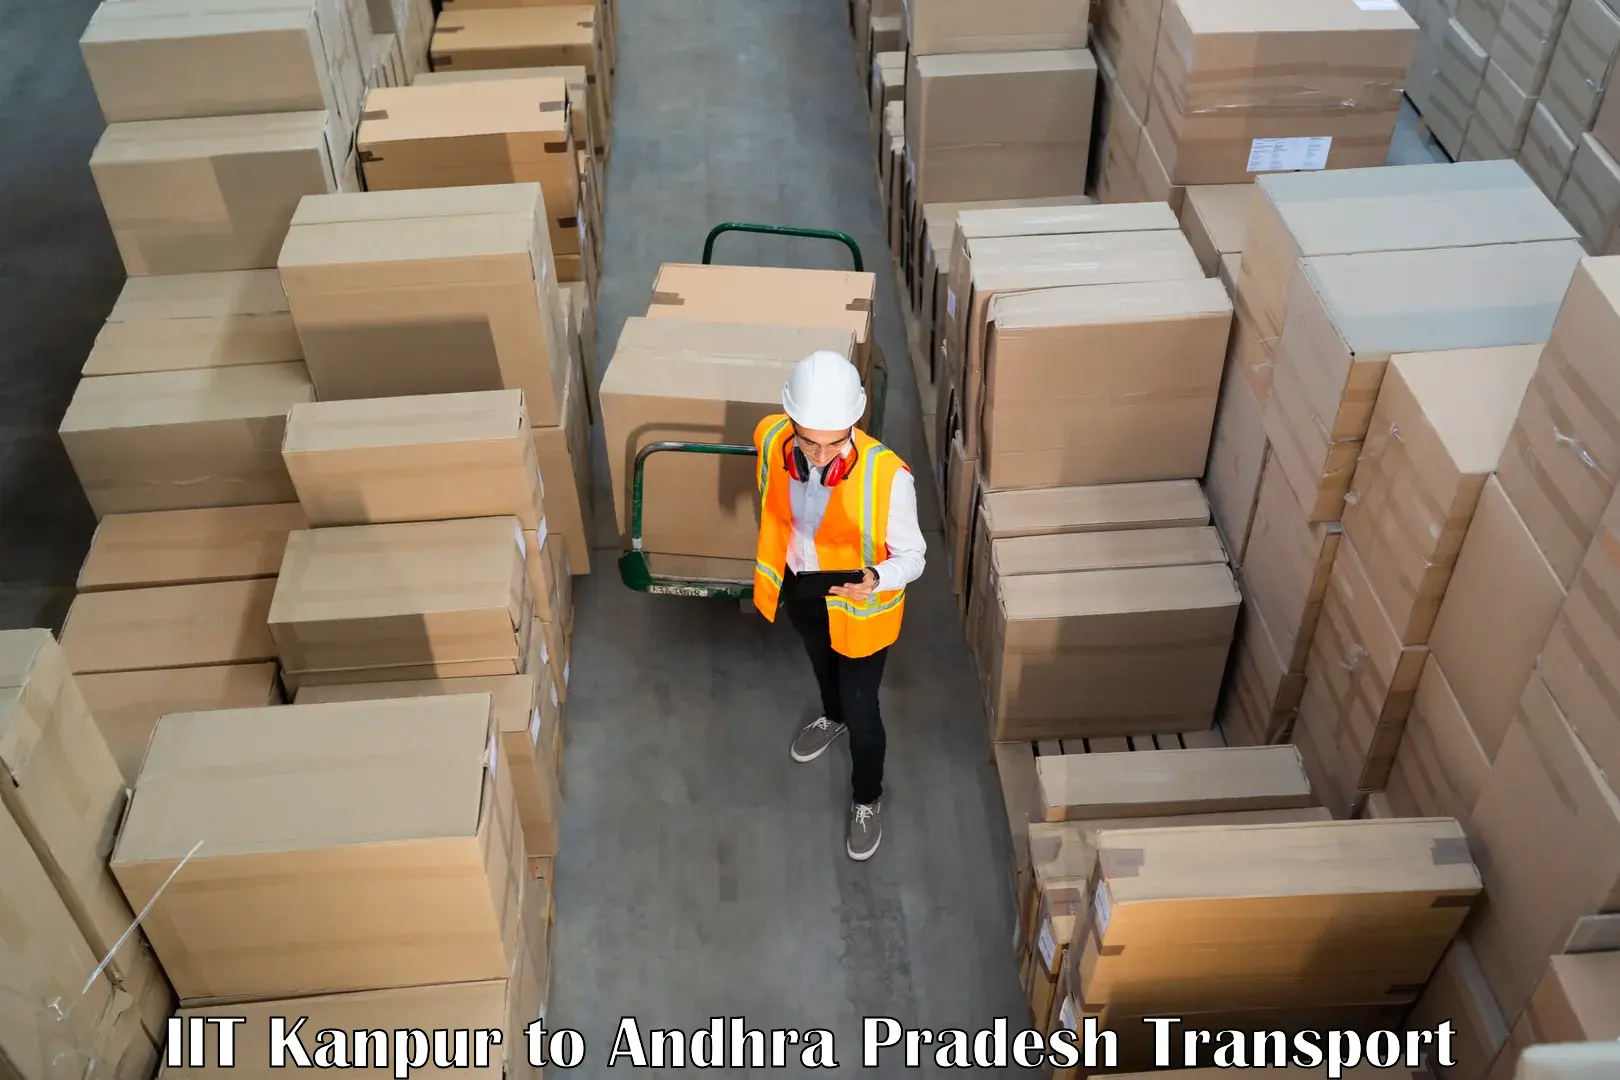 Furniture transport service IIT Kanpur to Parchoor